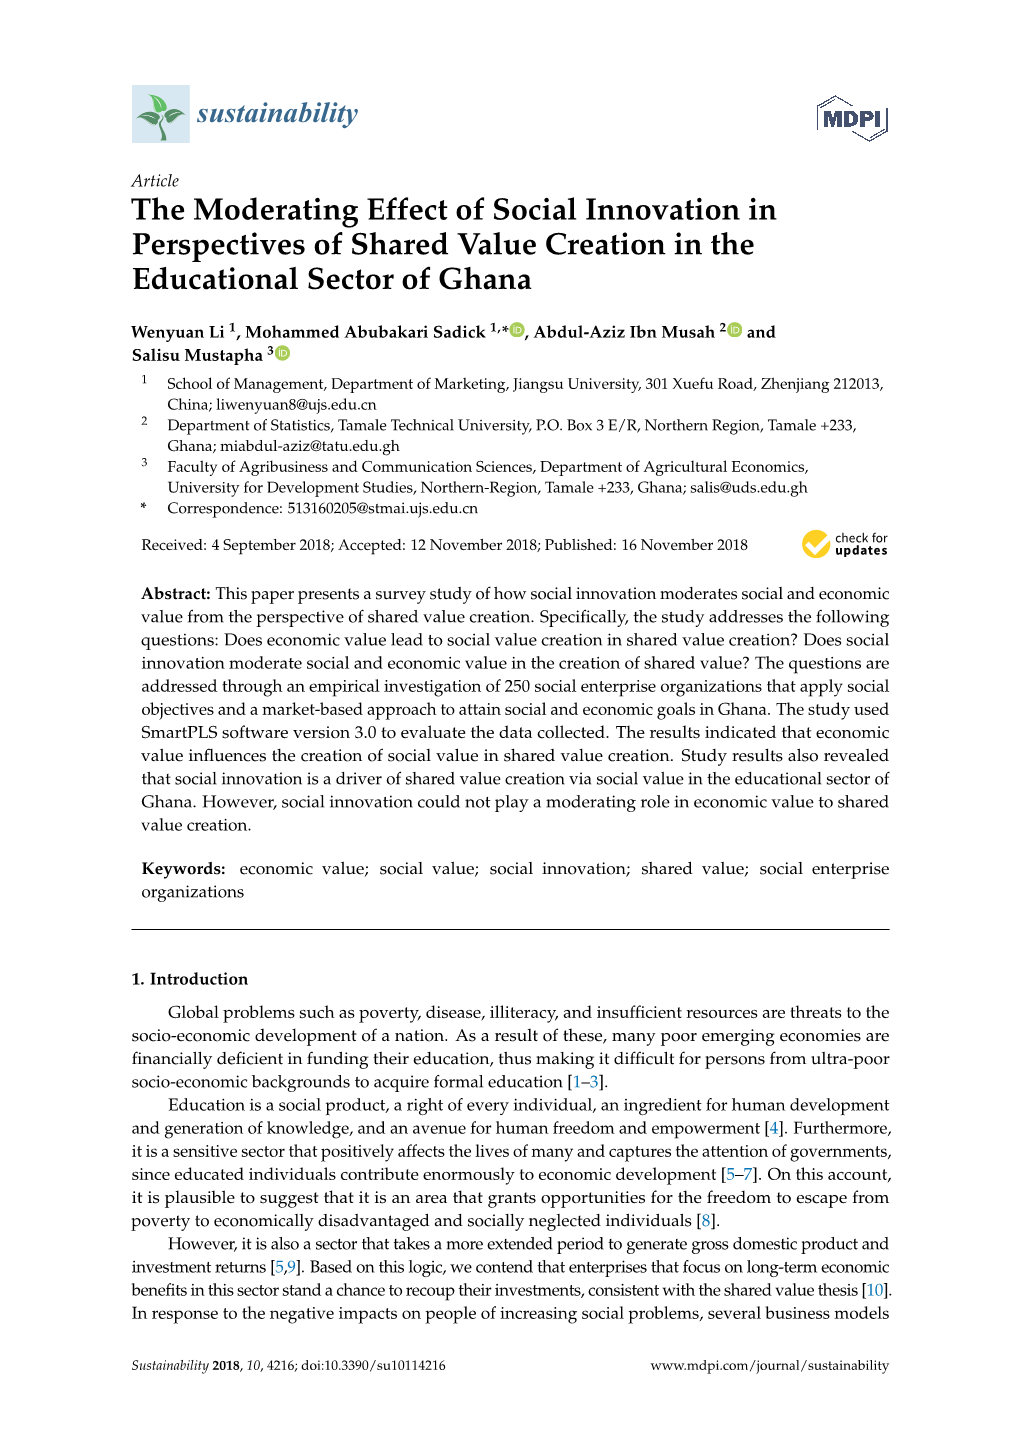 The Moderating Effect of Social Innovation in Perspectives of Shared Value Creation in the Educational Sector of Ghana